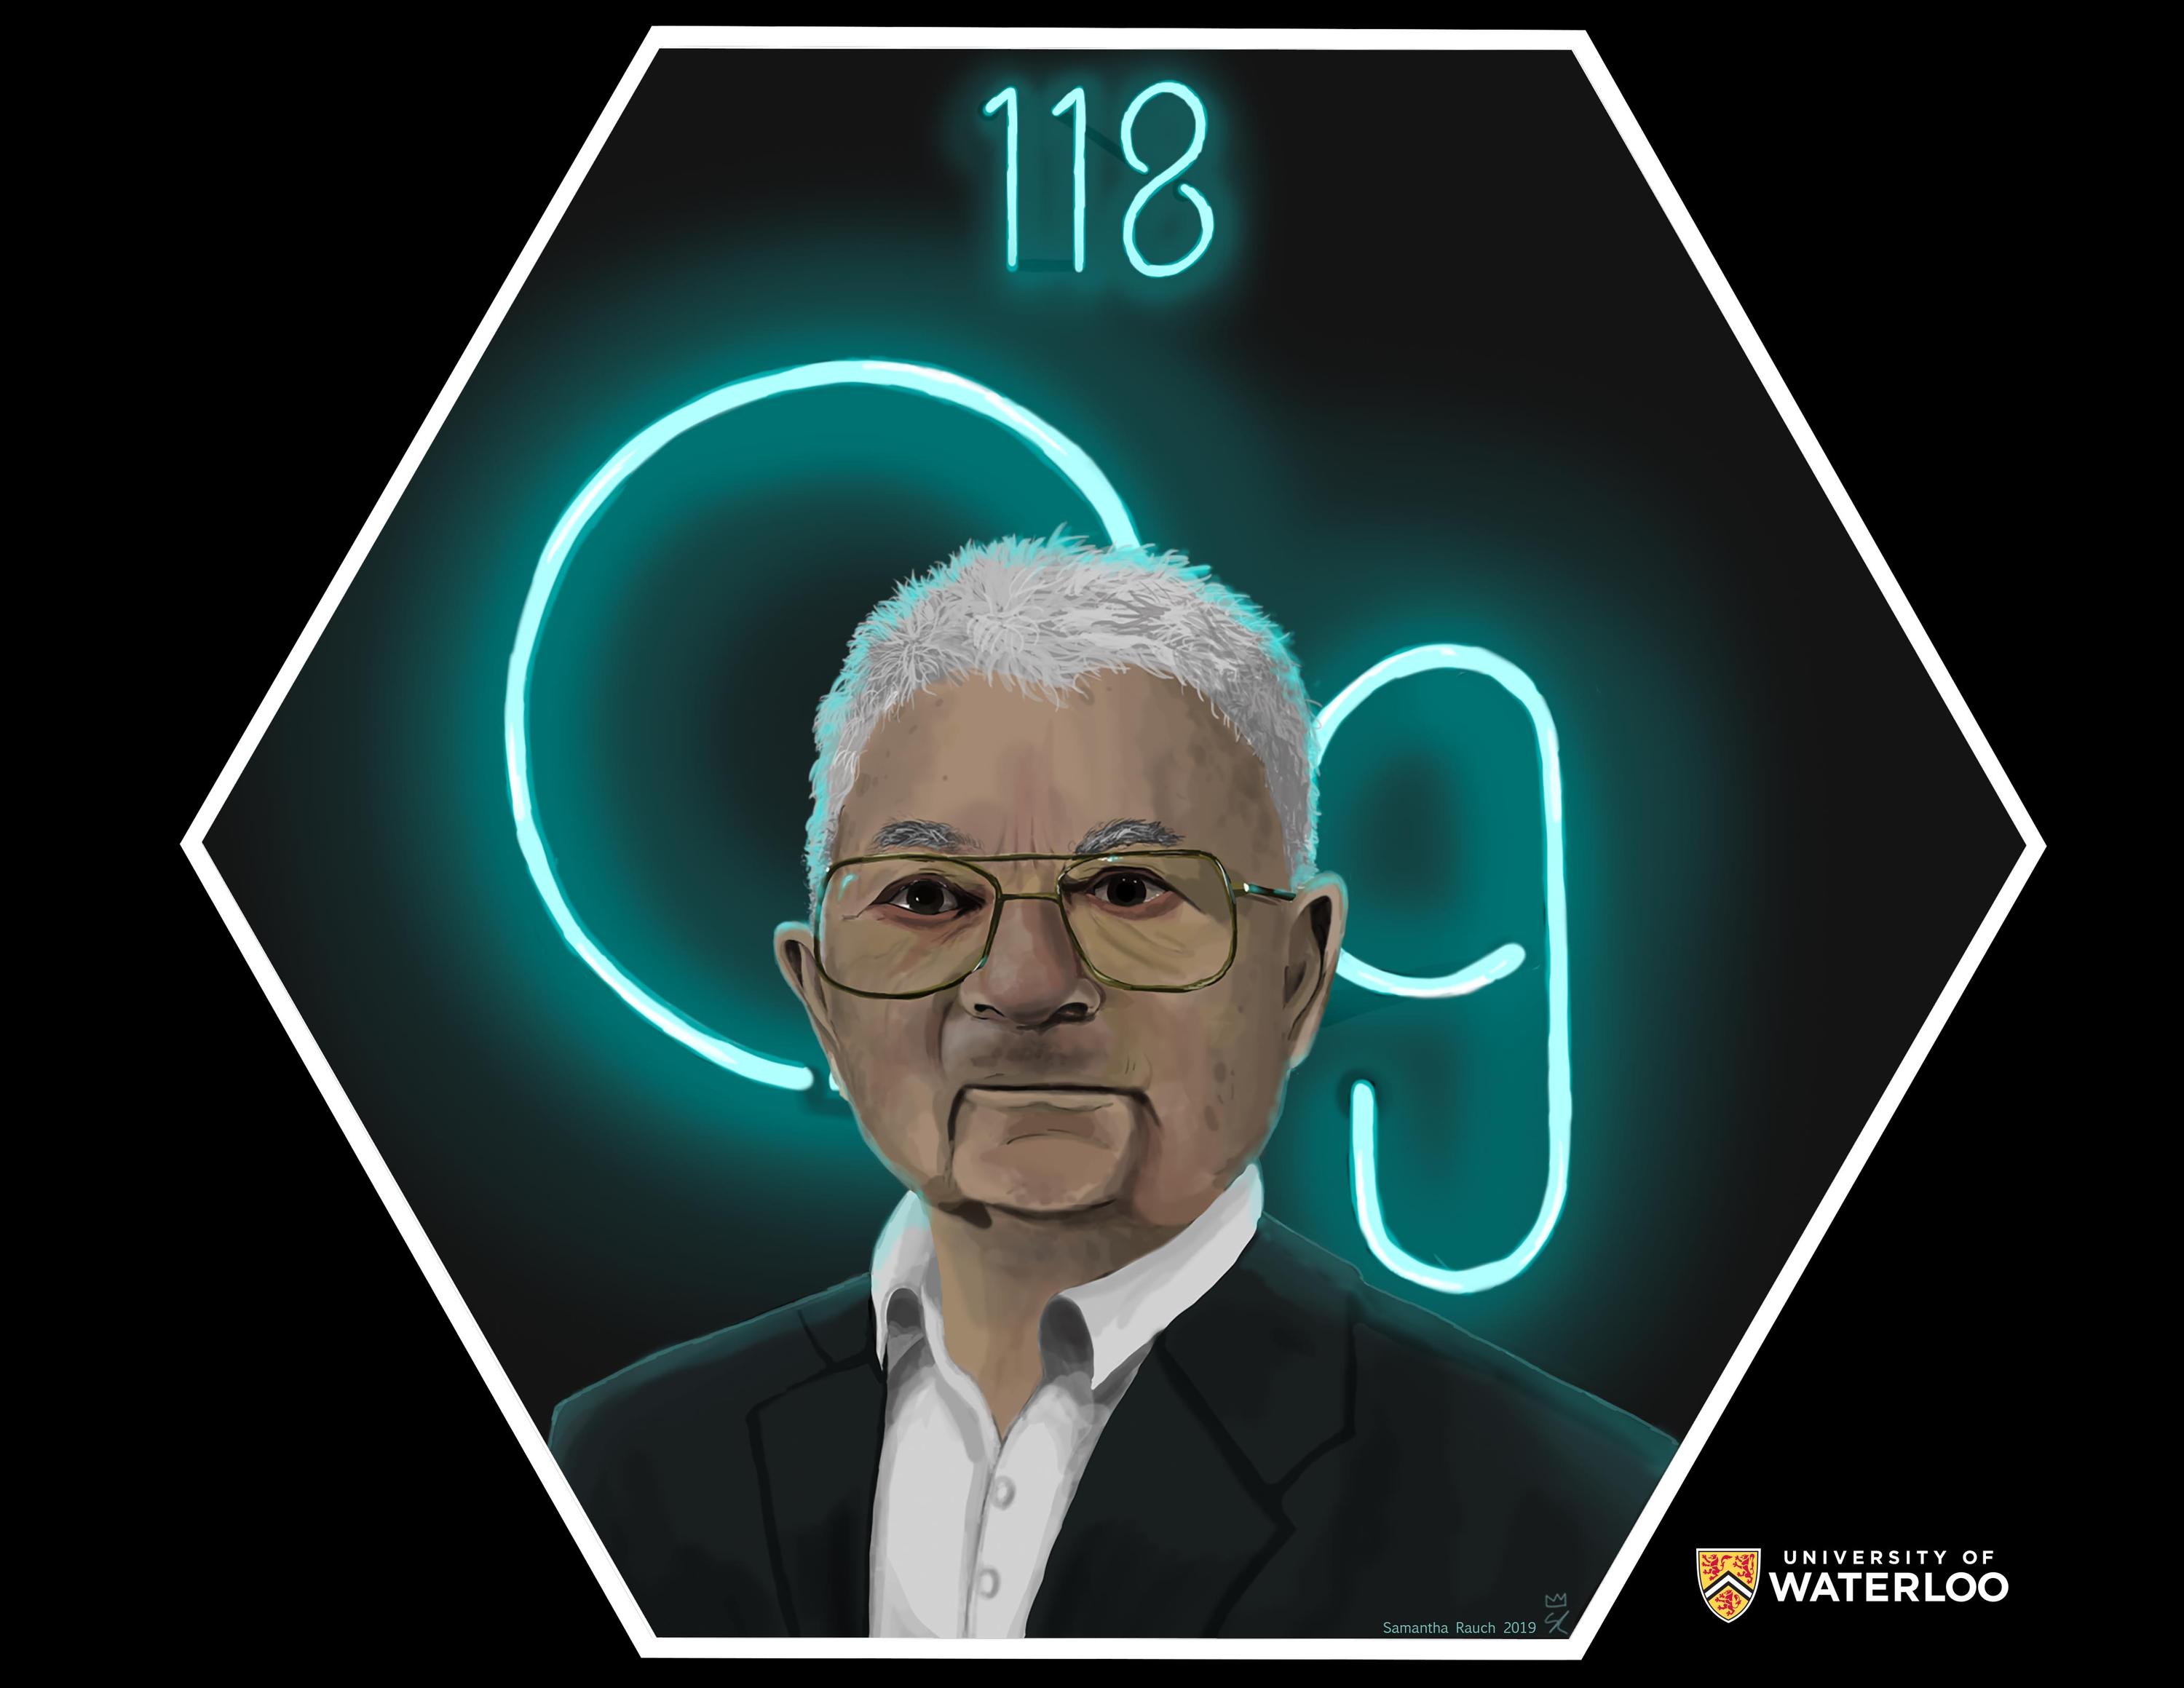 Digital artwork on black background. Centre foreground is Yuri Oganessian. Behind him is the chemical symbol “Og” with “118” drawn to look like a glowing blue-green neon sign.